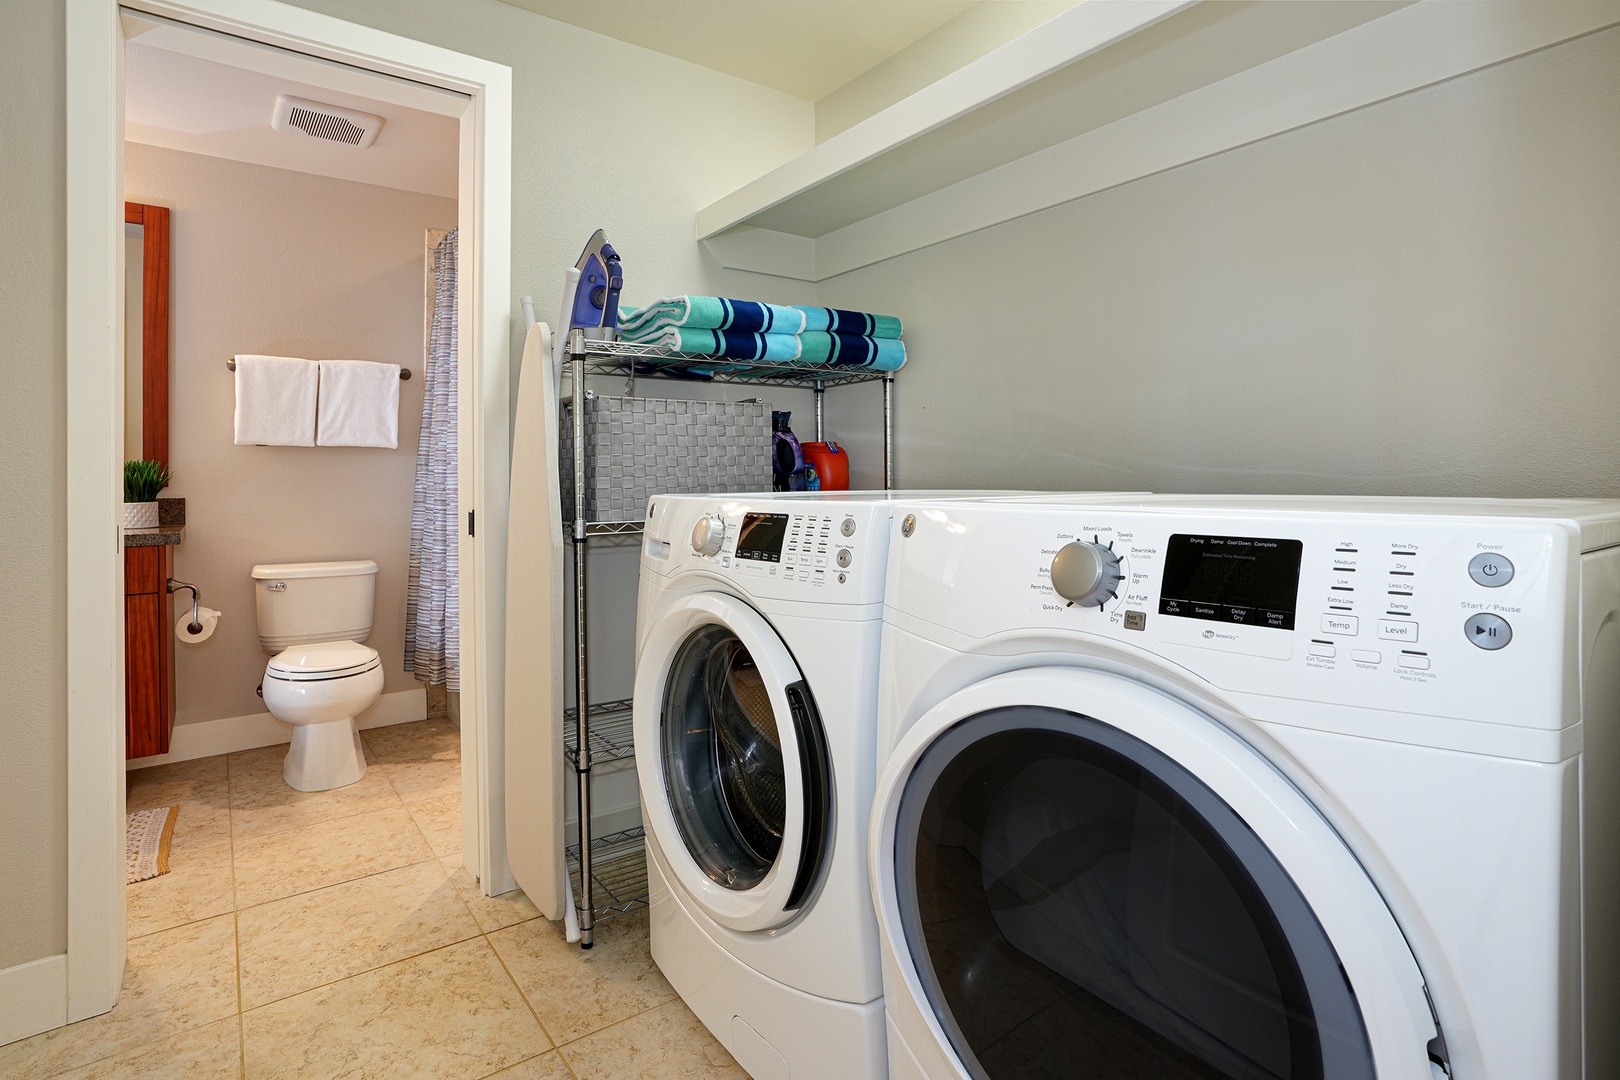 Koloa Vacation Rentals, Pili Mai 15G - In-unit washer and dryer